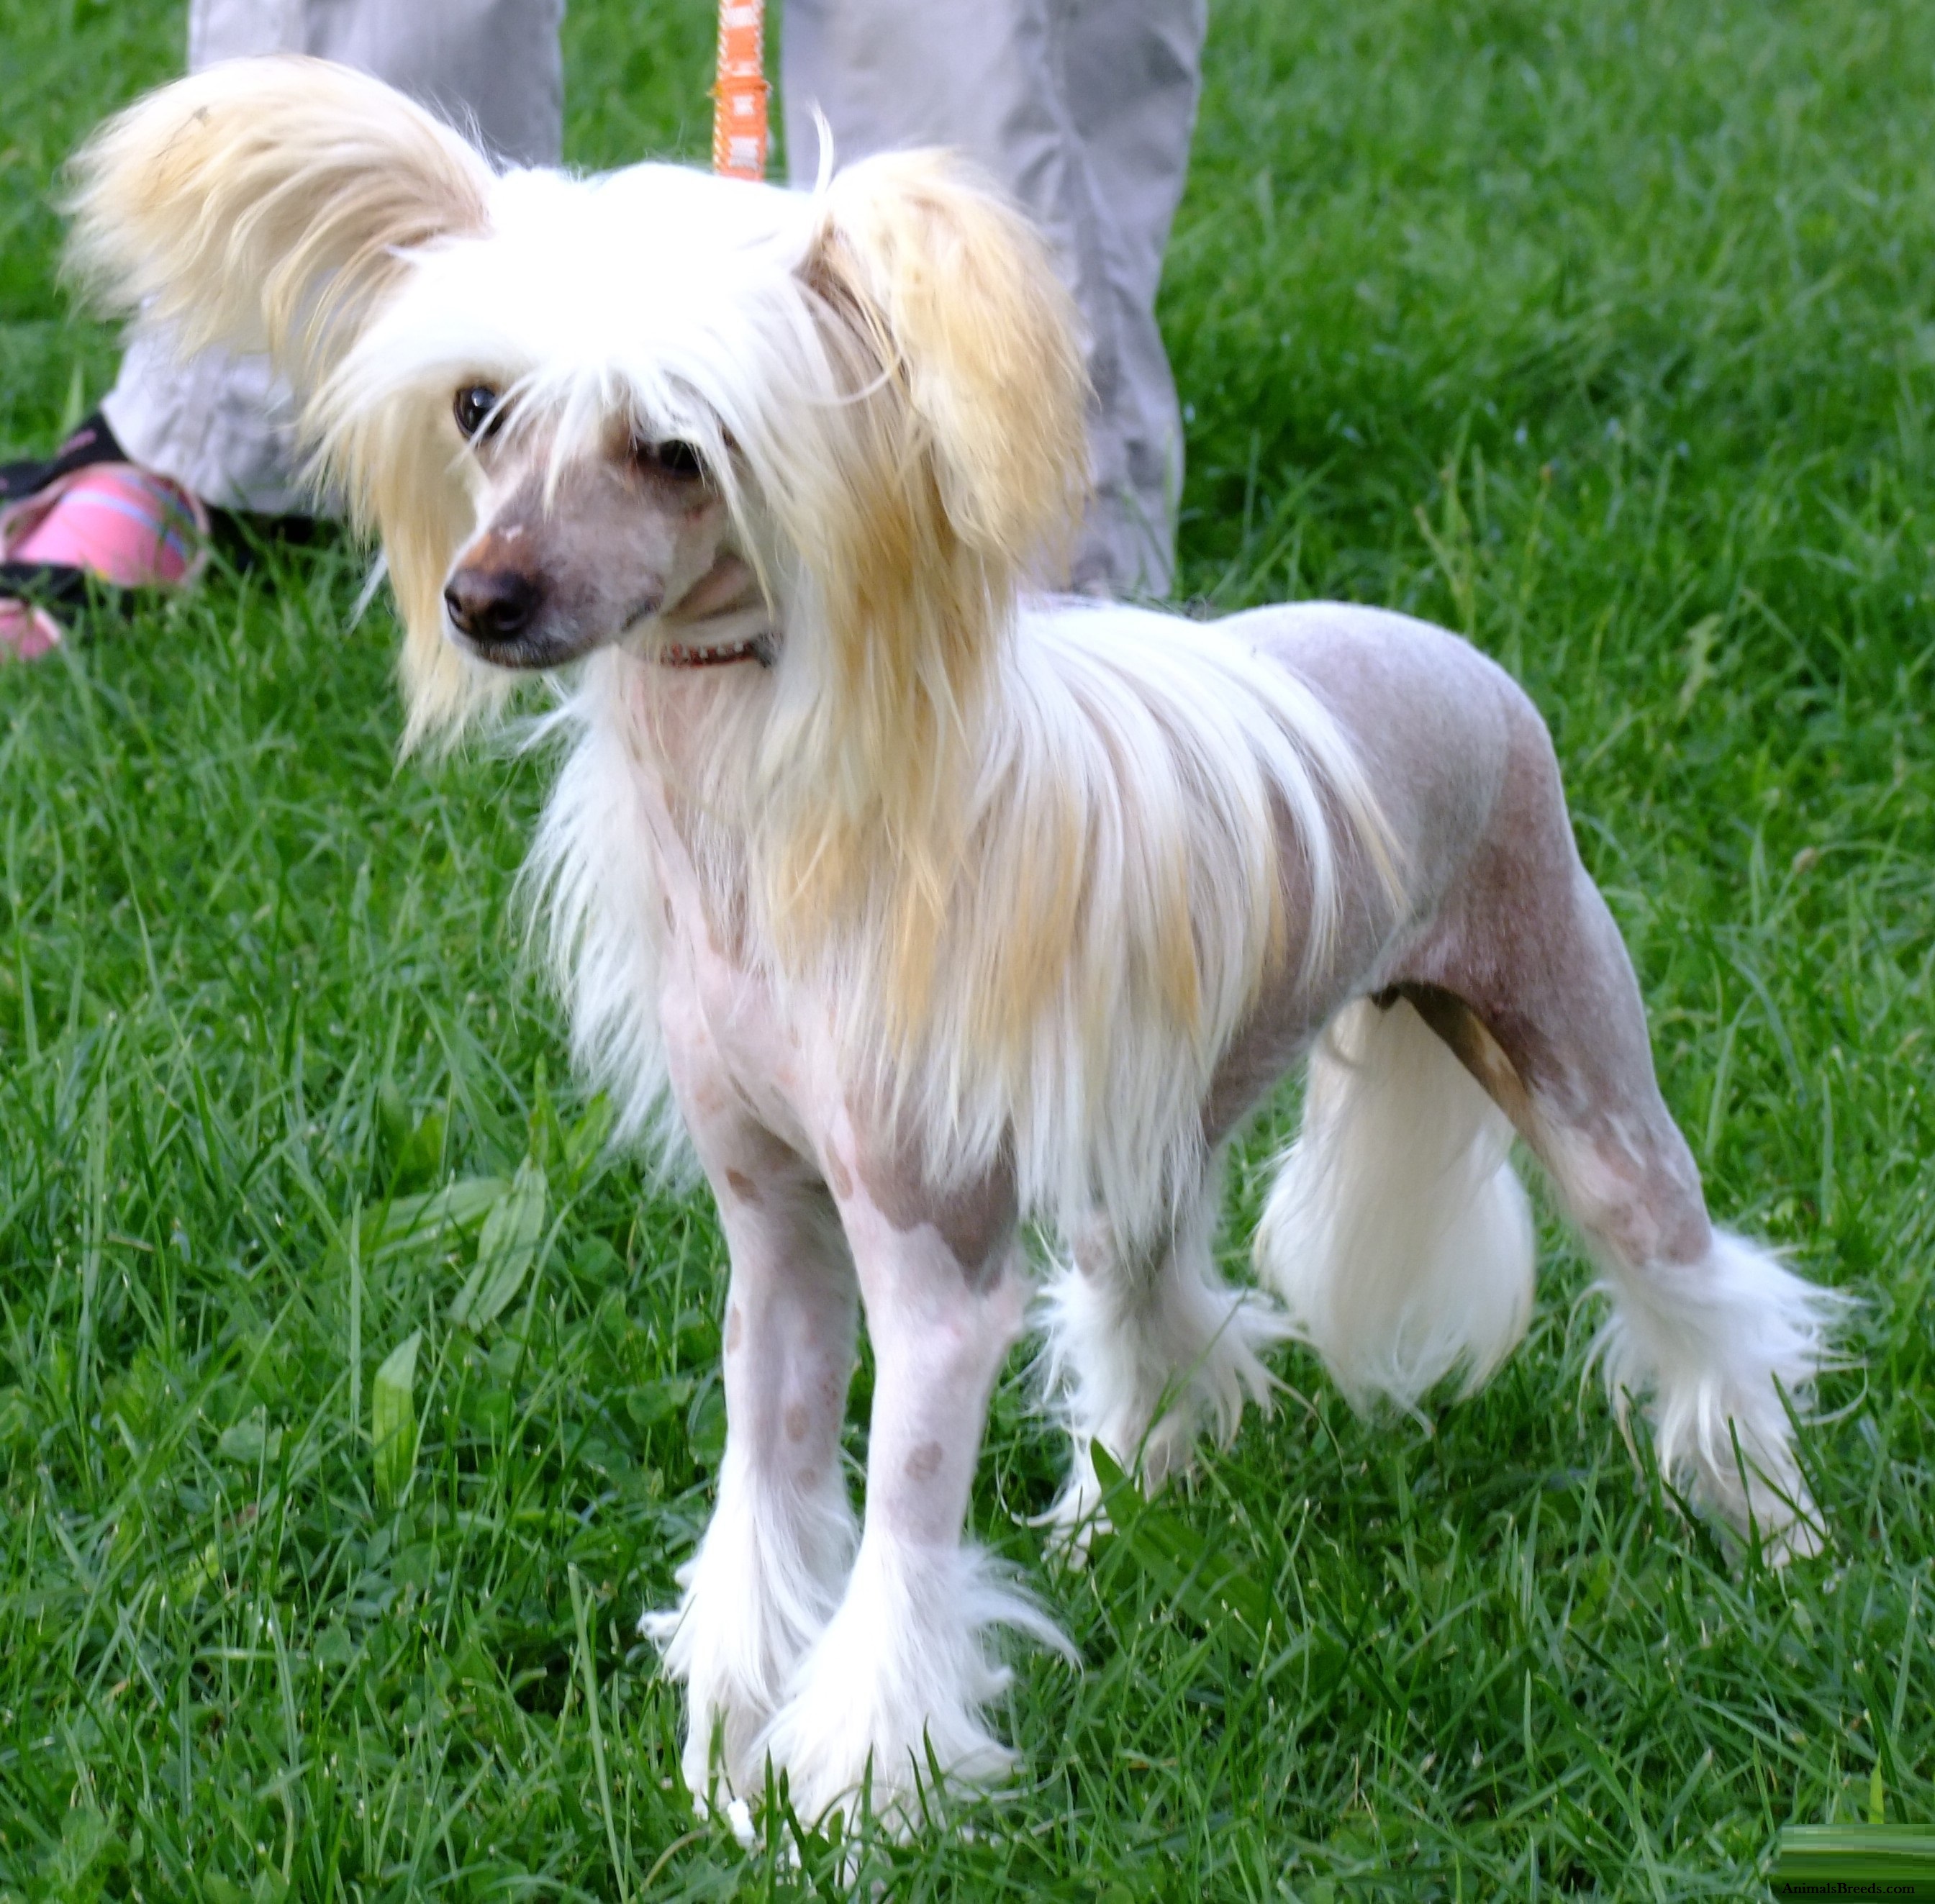 Chinese Crested dog in a garden